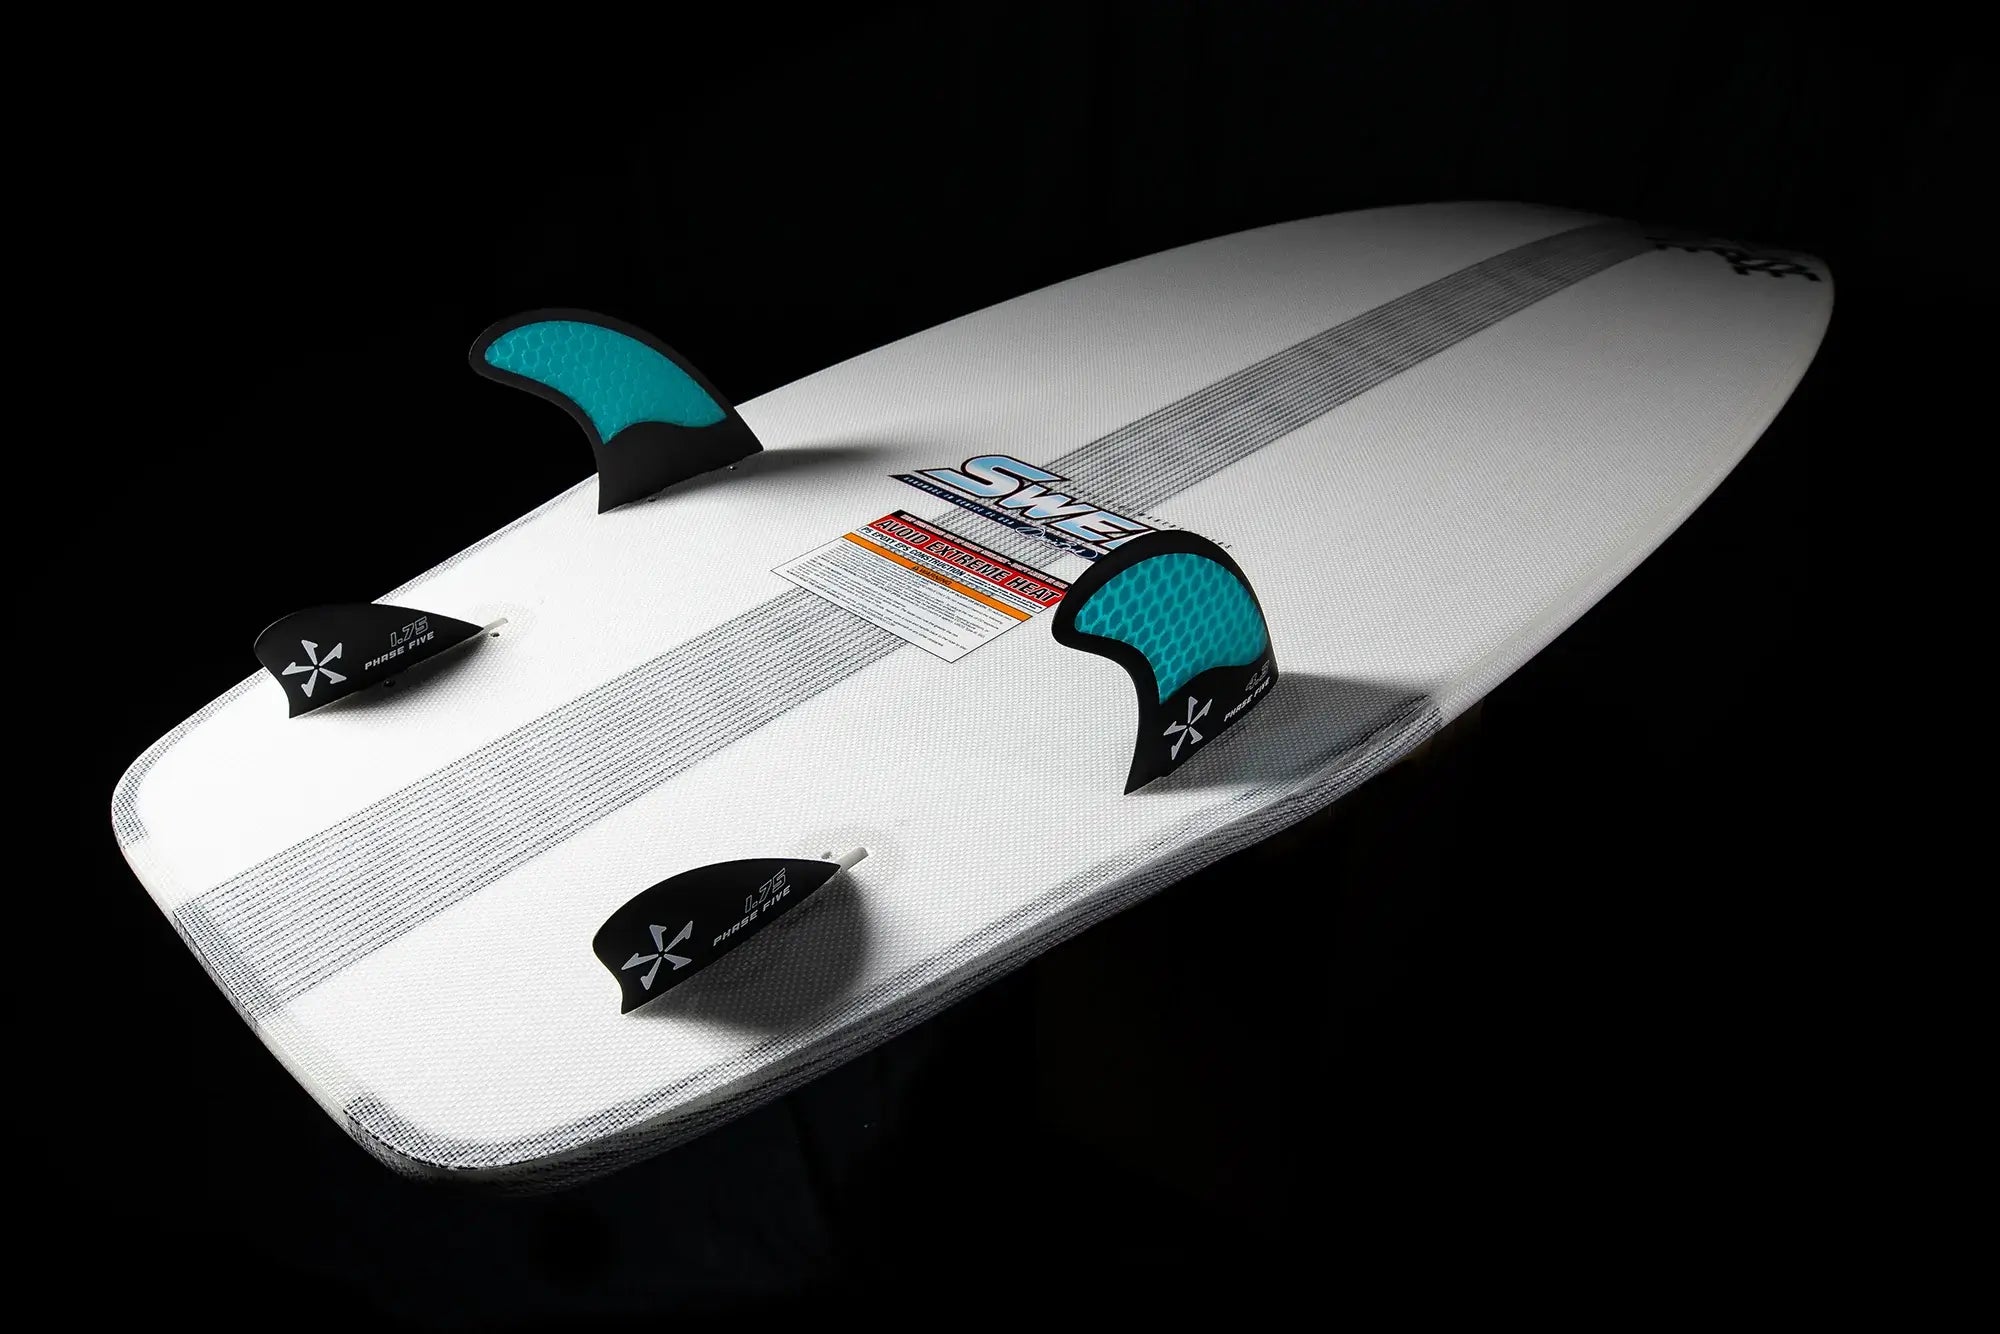 The Phase 5 2024 Swell Wakesurf Board by Phase 5 is a high performance white surfboard with blue fins on it, designed by Stacia Bank.